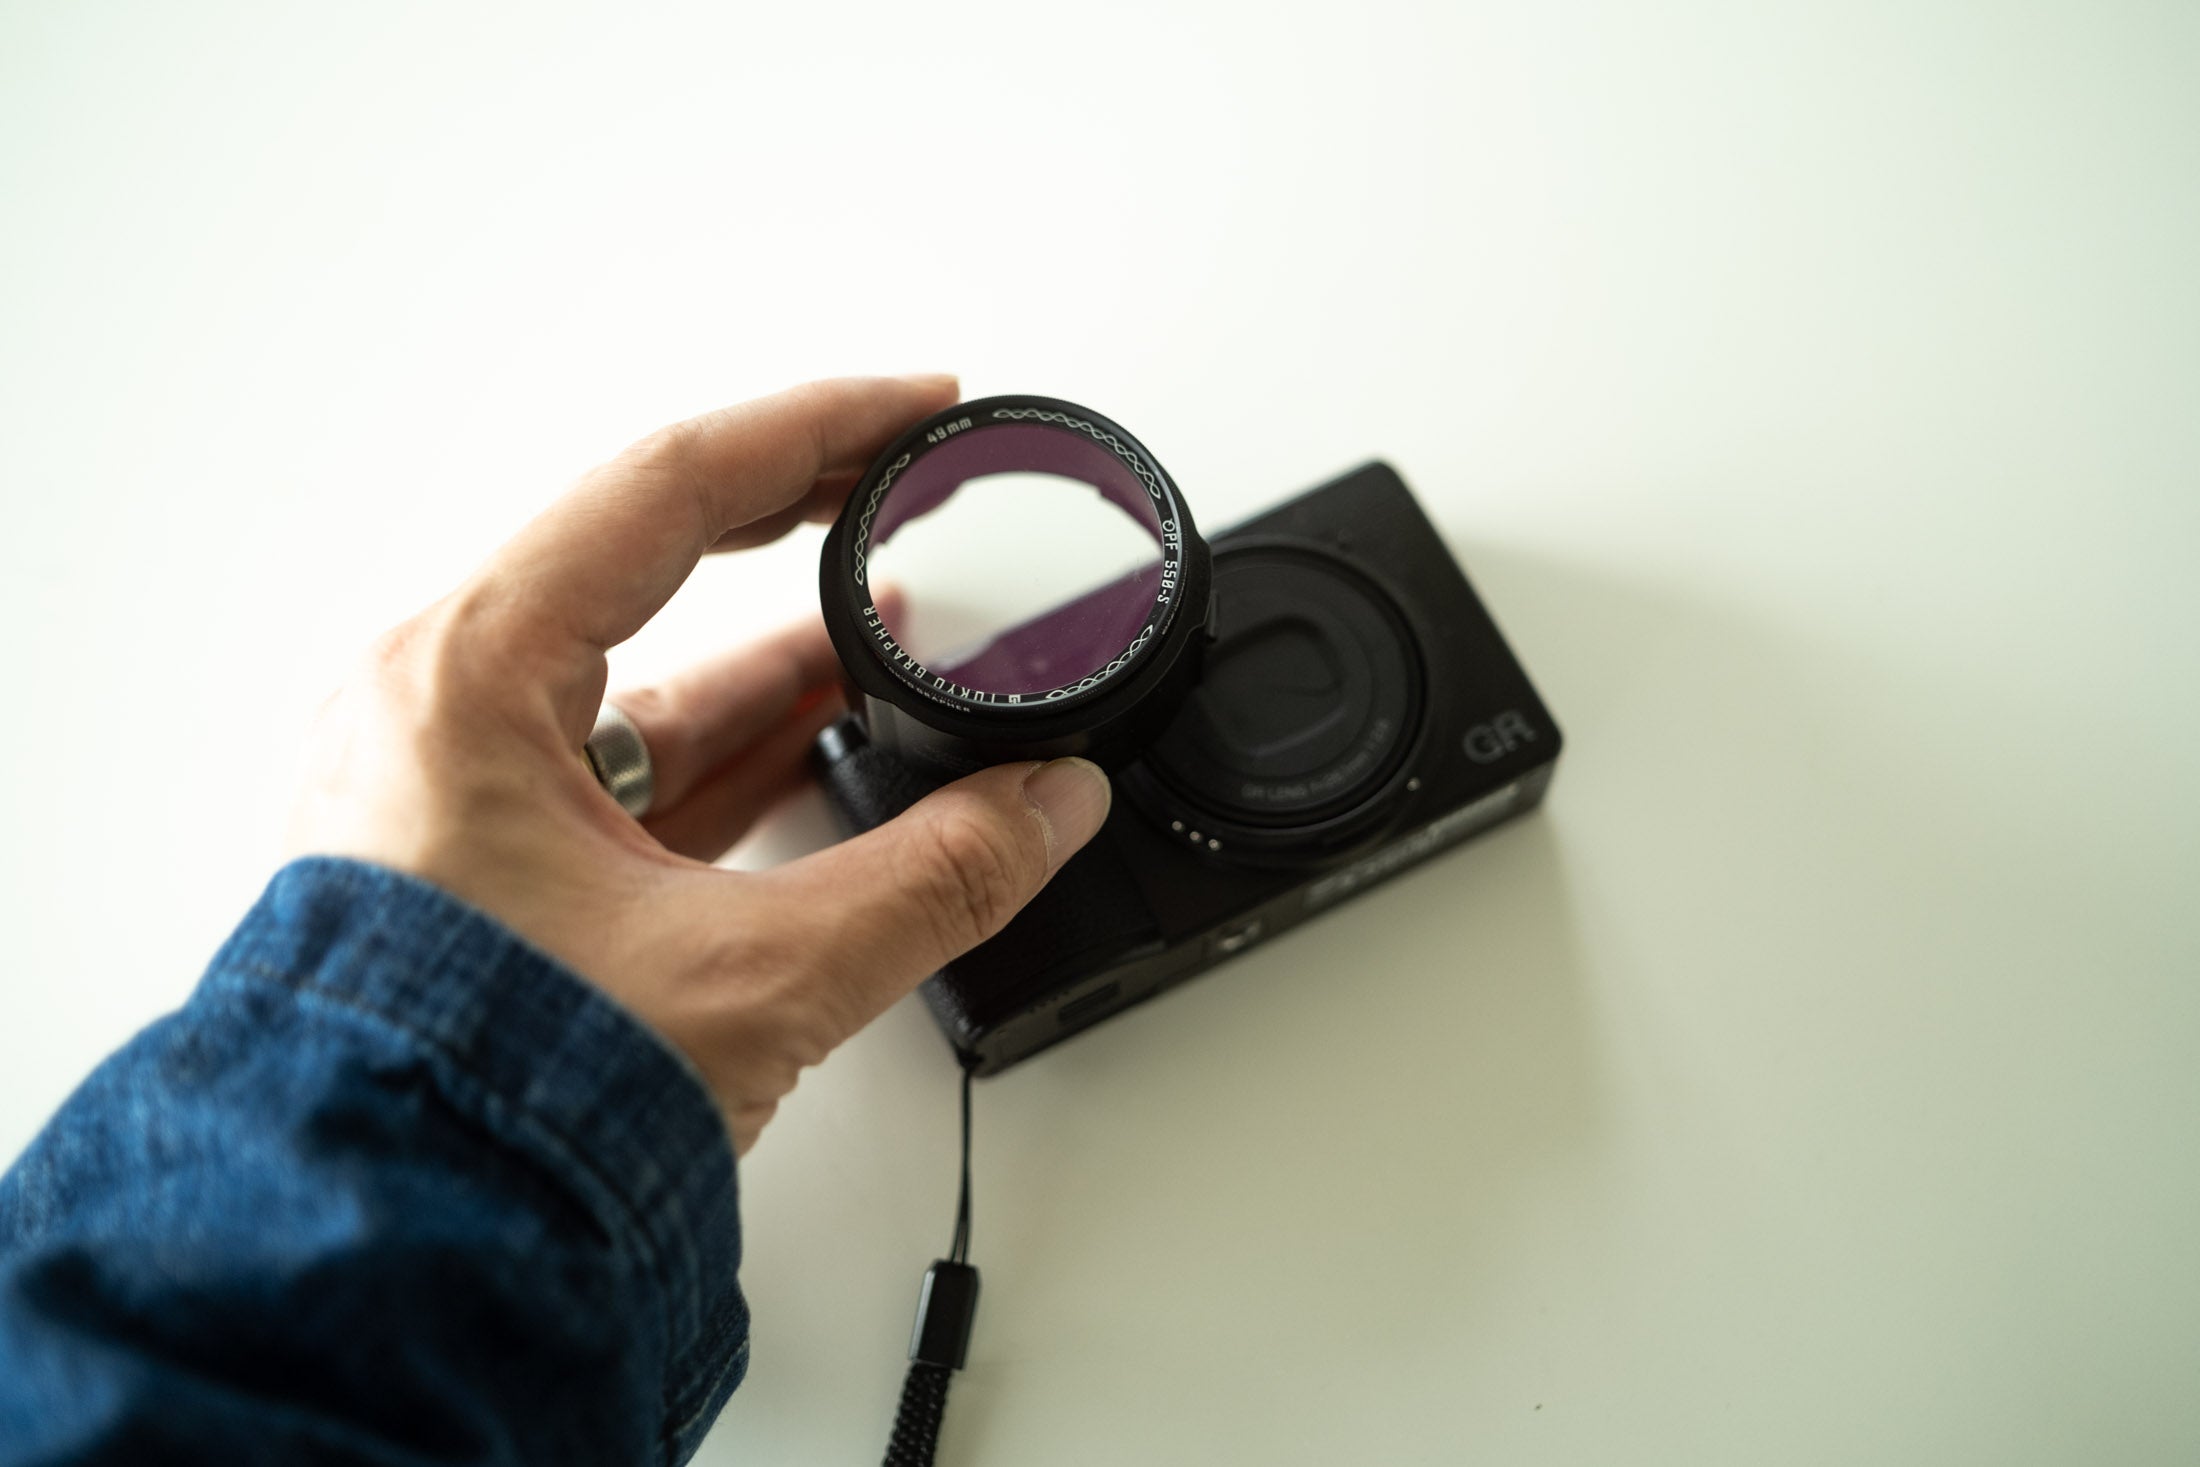 How to use lens filters on RICOH GR series